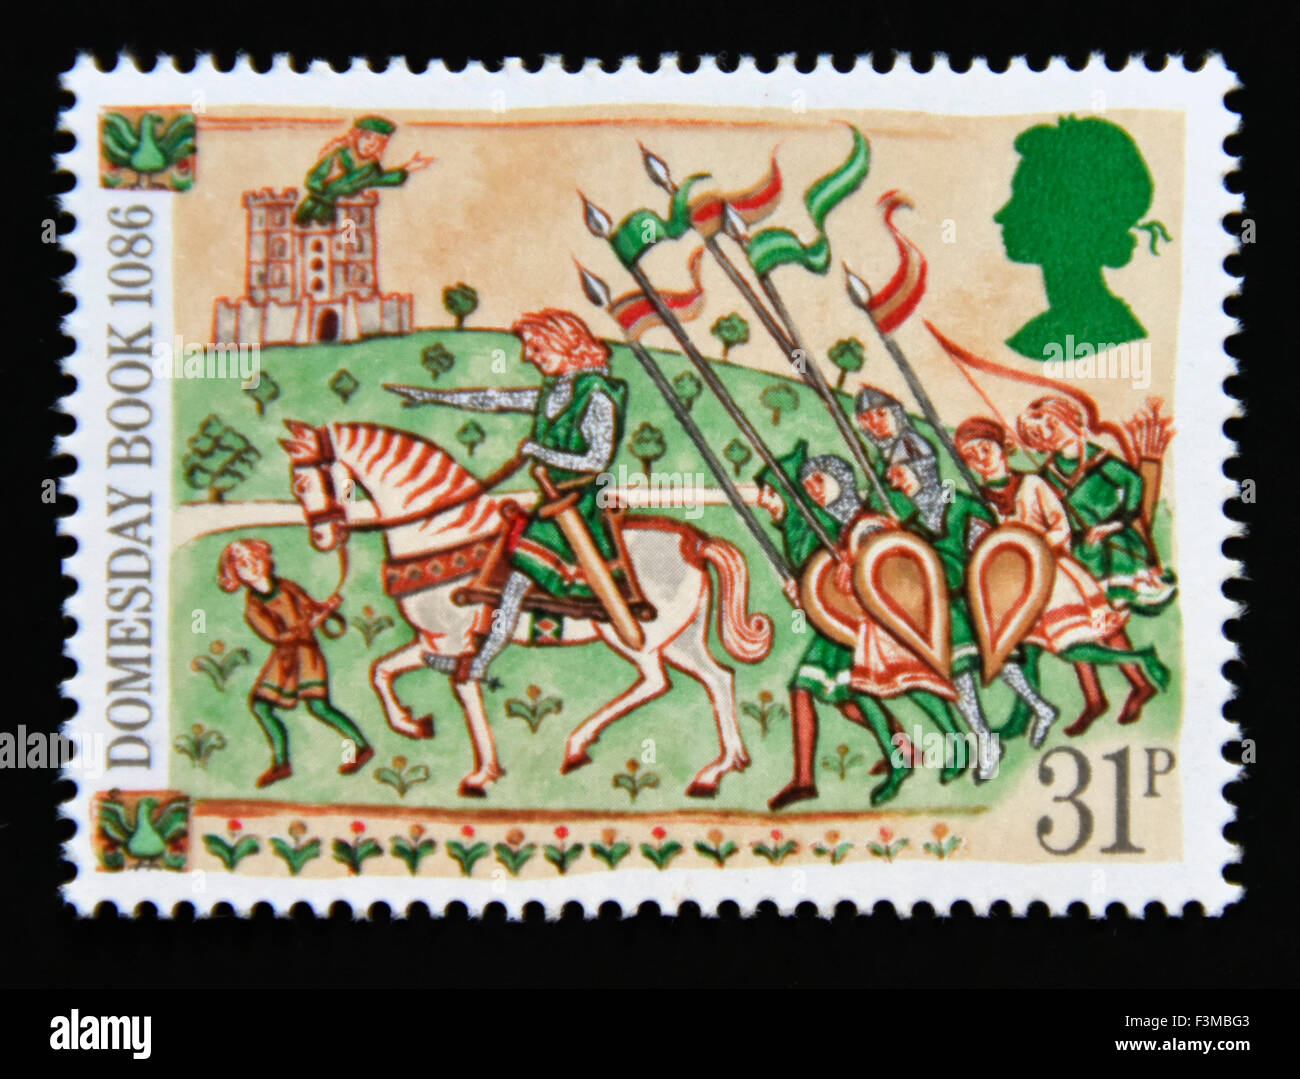 Postage stamp. Great Britain. Queen Elizabeth II. 1986. 900th. Anniversary of Domesday Book. 31p. Stock Photo